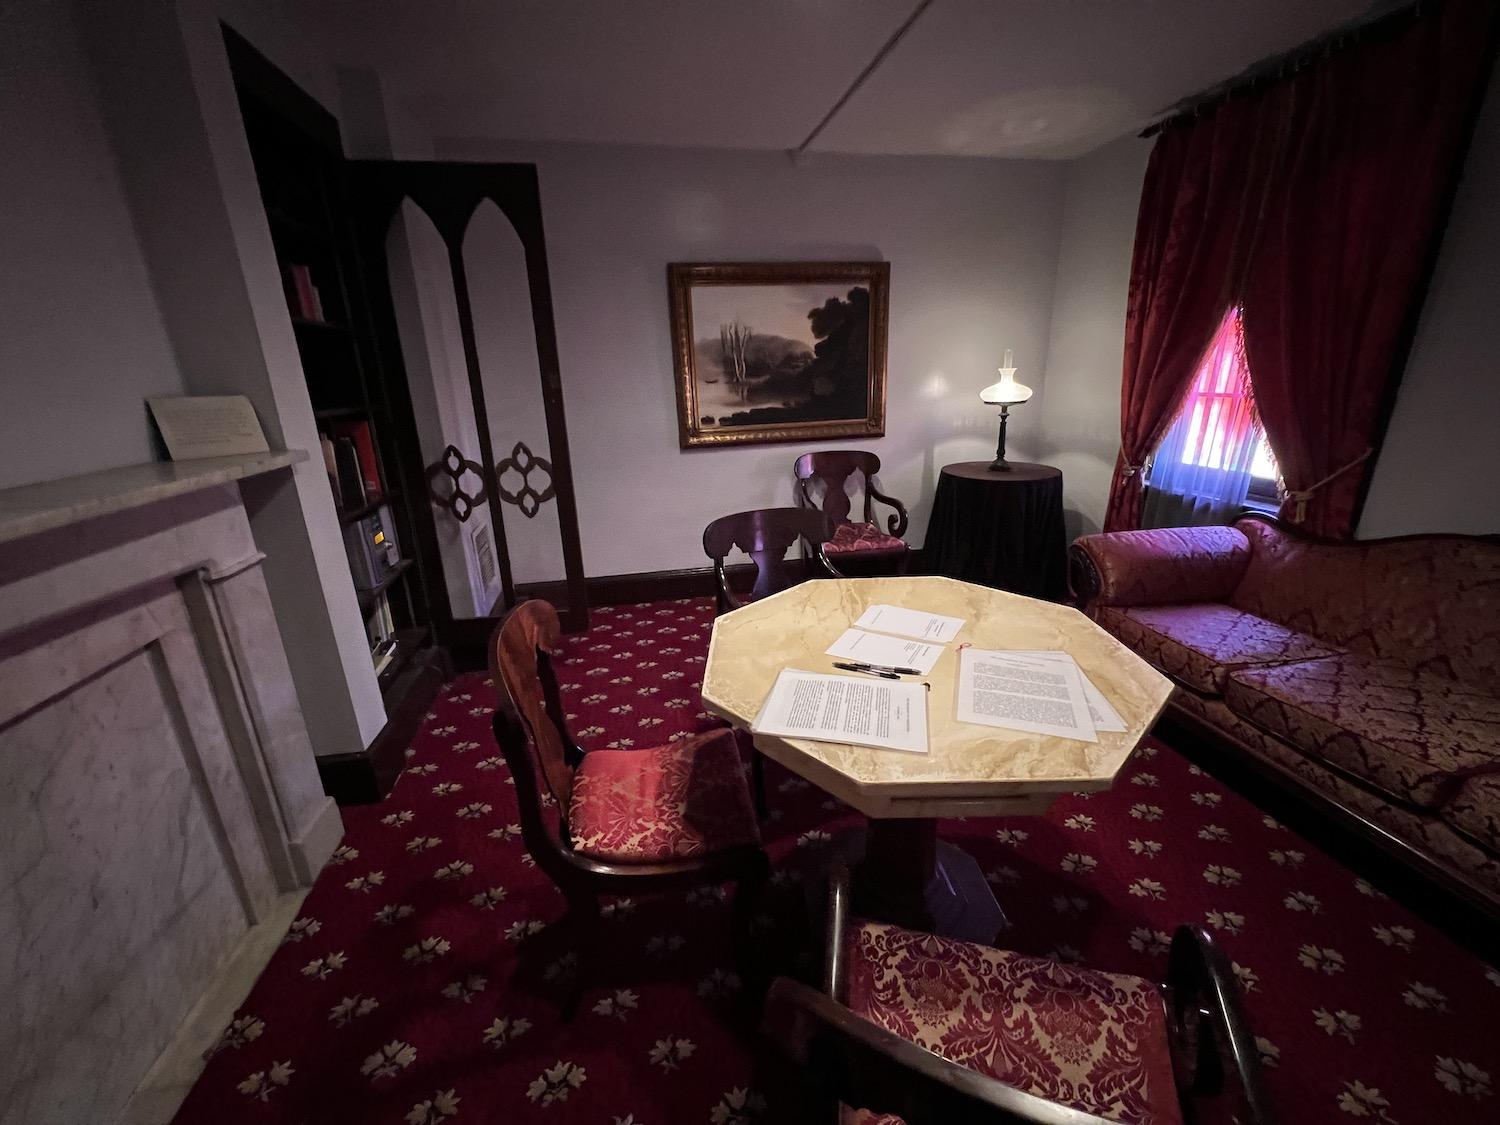 In contrast to the unfurnished former home of Edgar Allan Poe, the "Reading Room" in an adjoining building has been furnished in honour of one of his fictional essays.